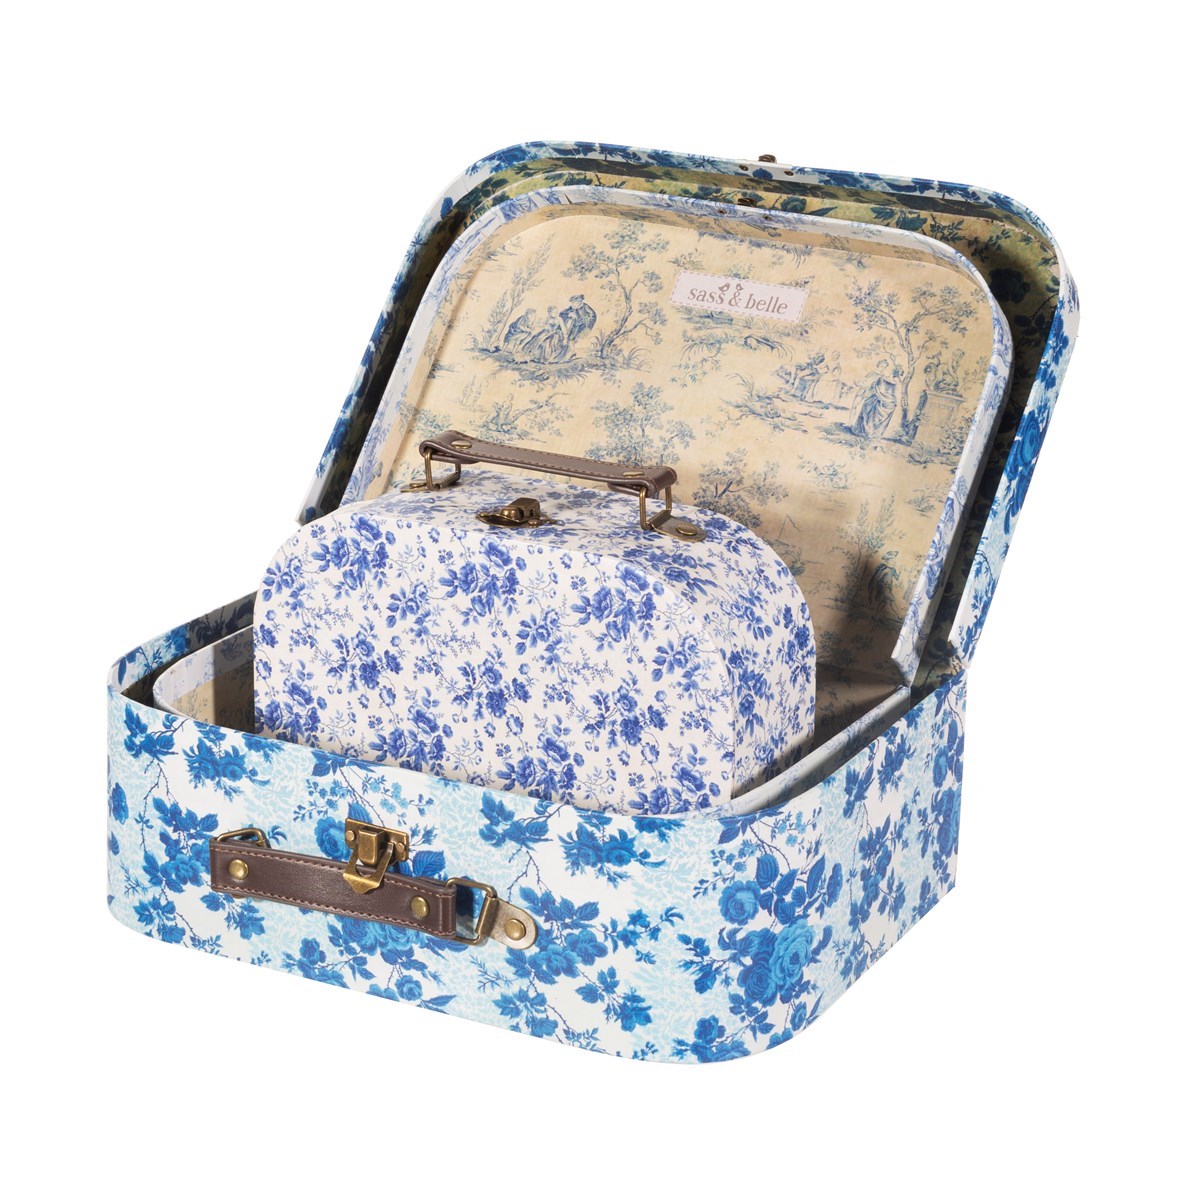 Sass & Belle, storage boxes Blue and white floral, set of 3 